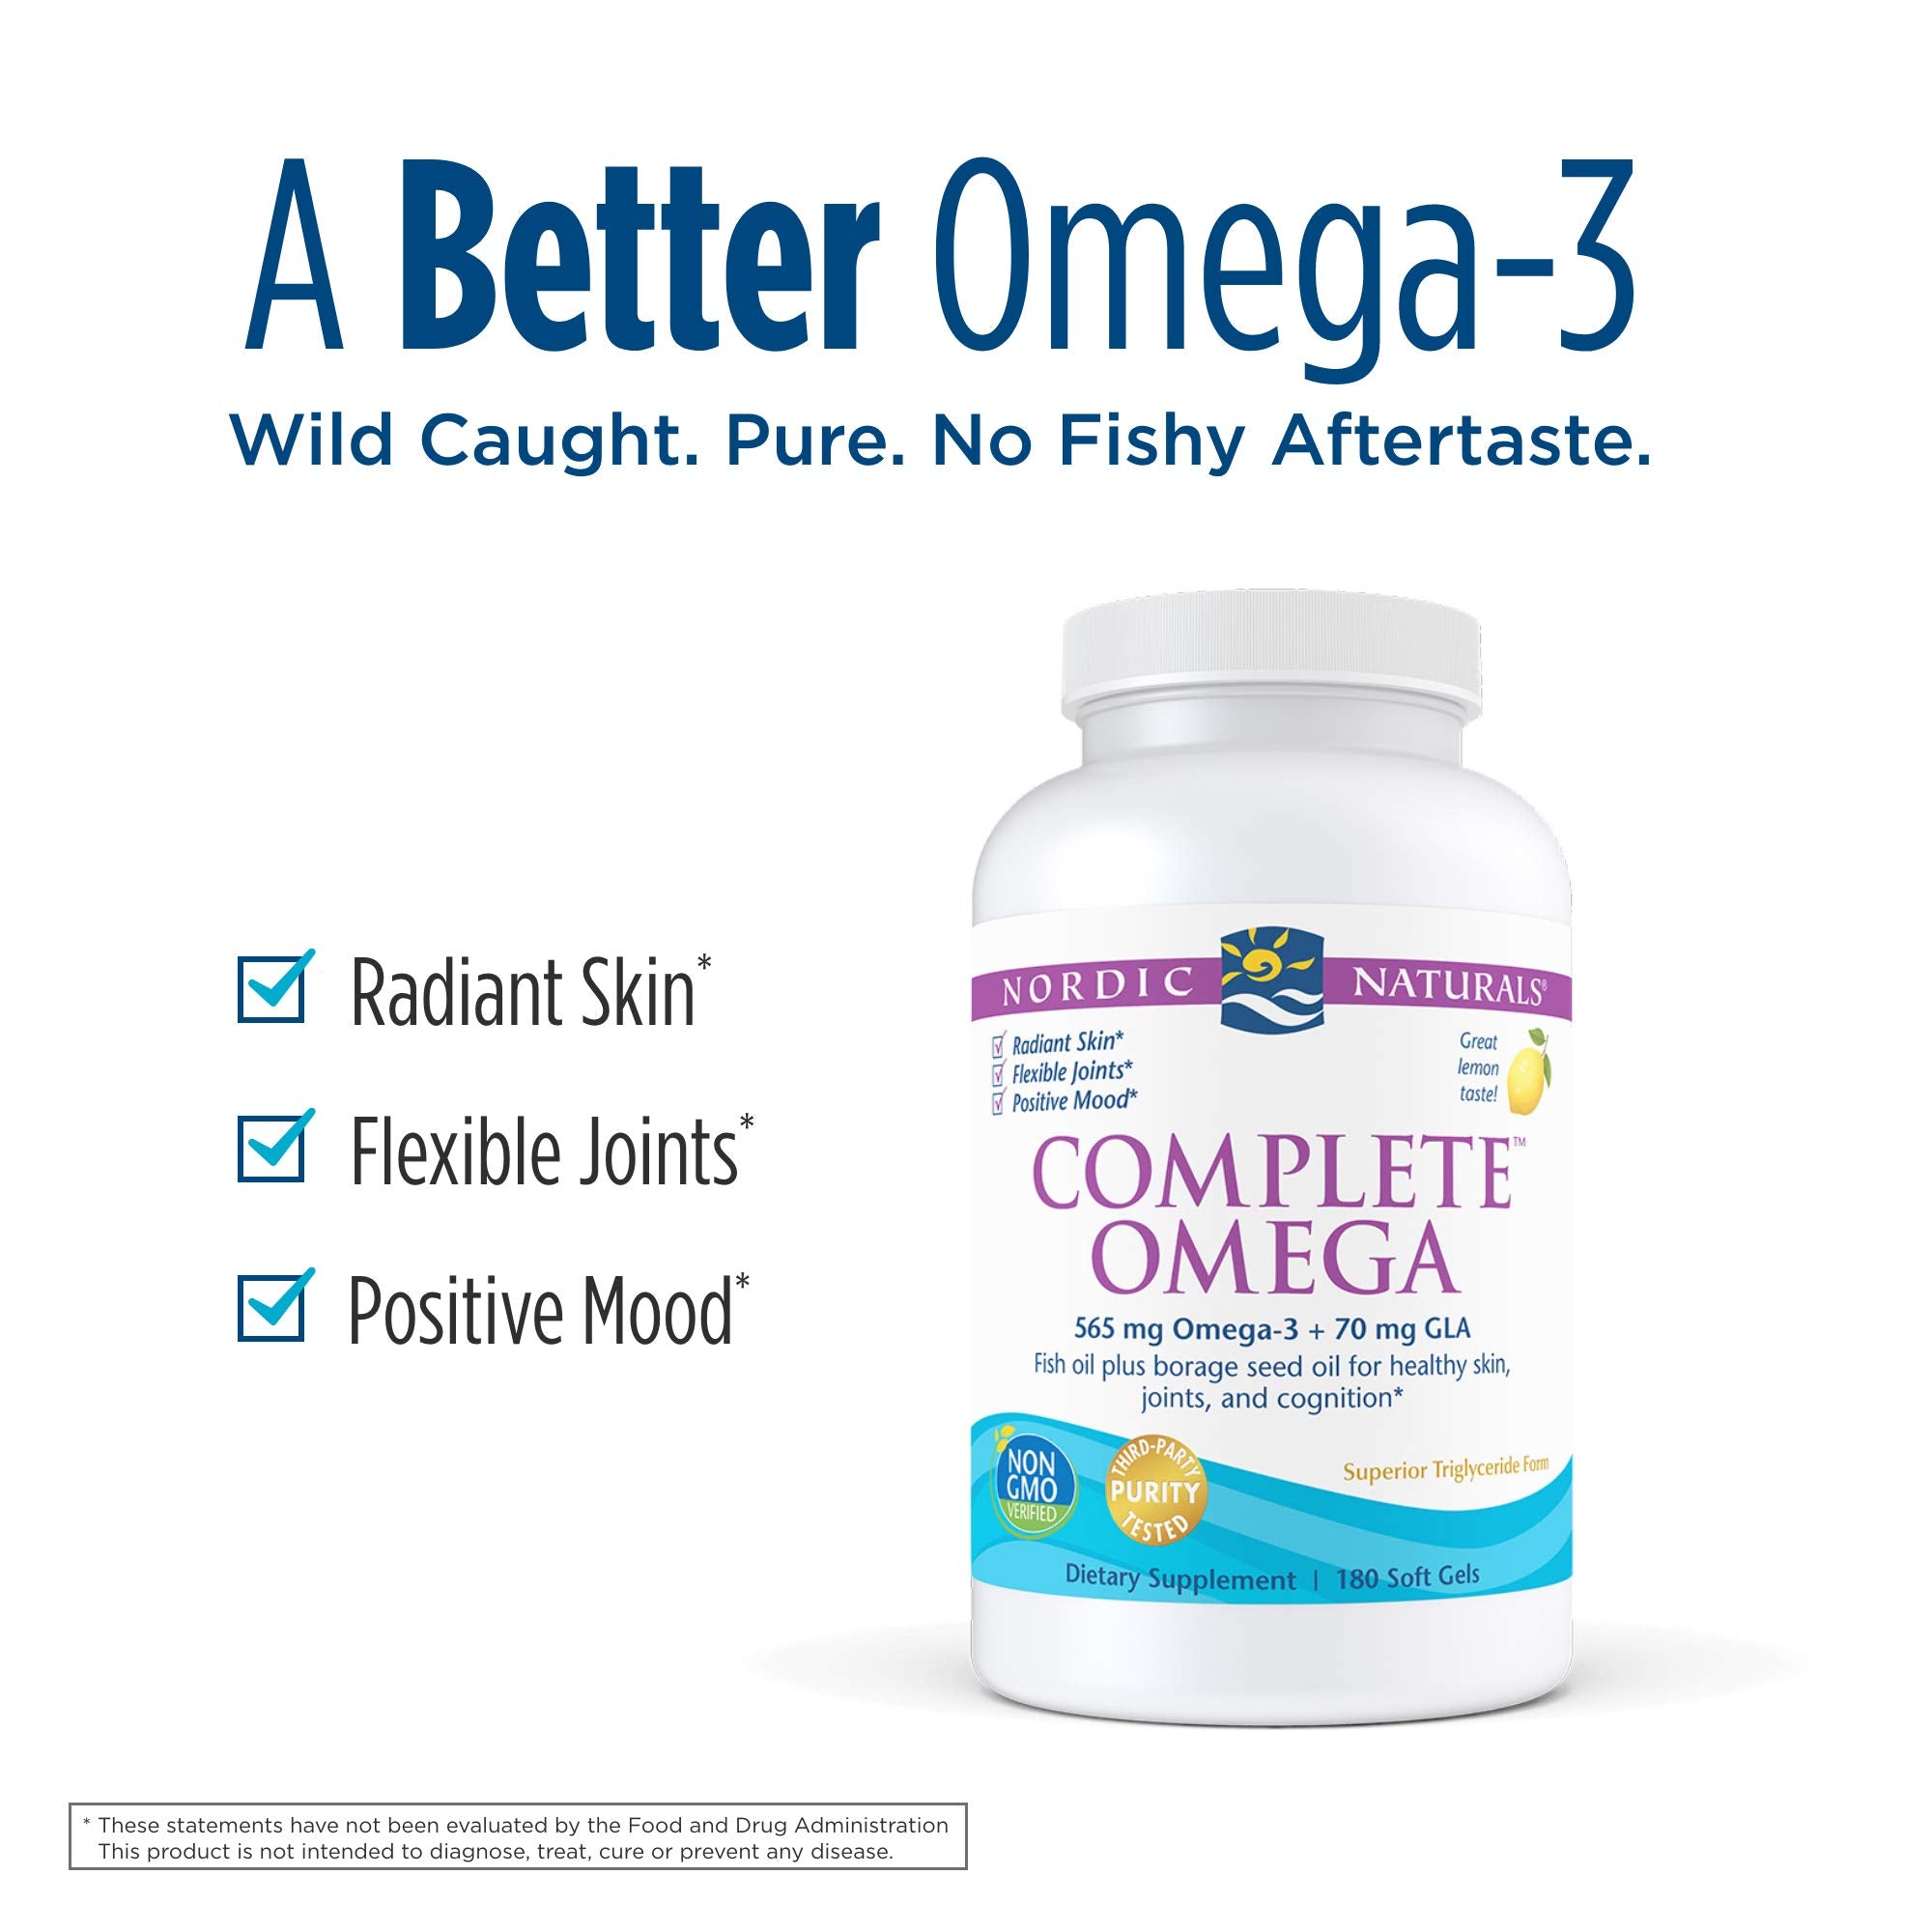 Nordic Naturals Complete Omega - Omegas 3-6-9 From Fish Oil and Borage Oil, Supports Heart, Brain, Joint, and Skin Health*, Burpless, Lemon Flavor, 180 Count